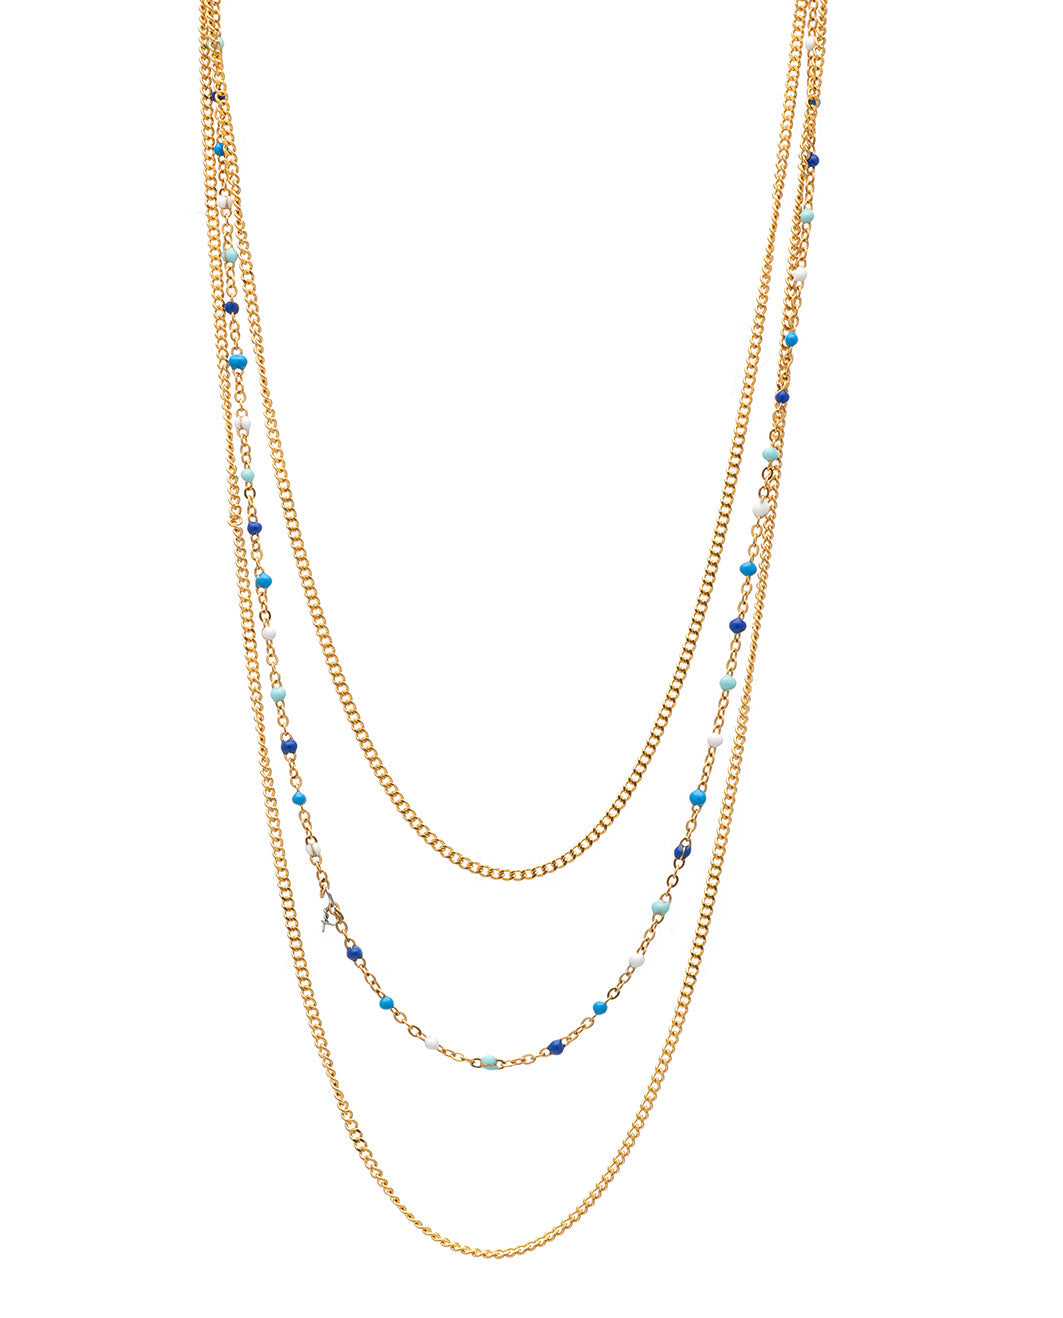 Triple Blue Shades Necklace